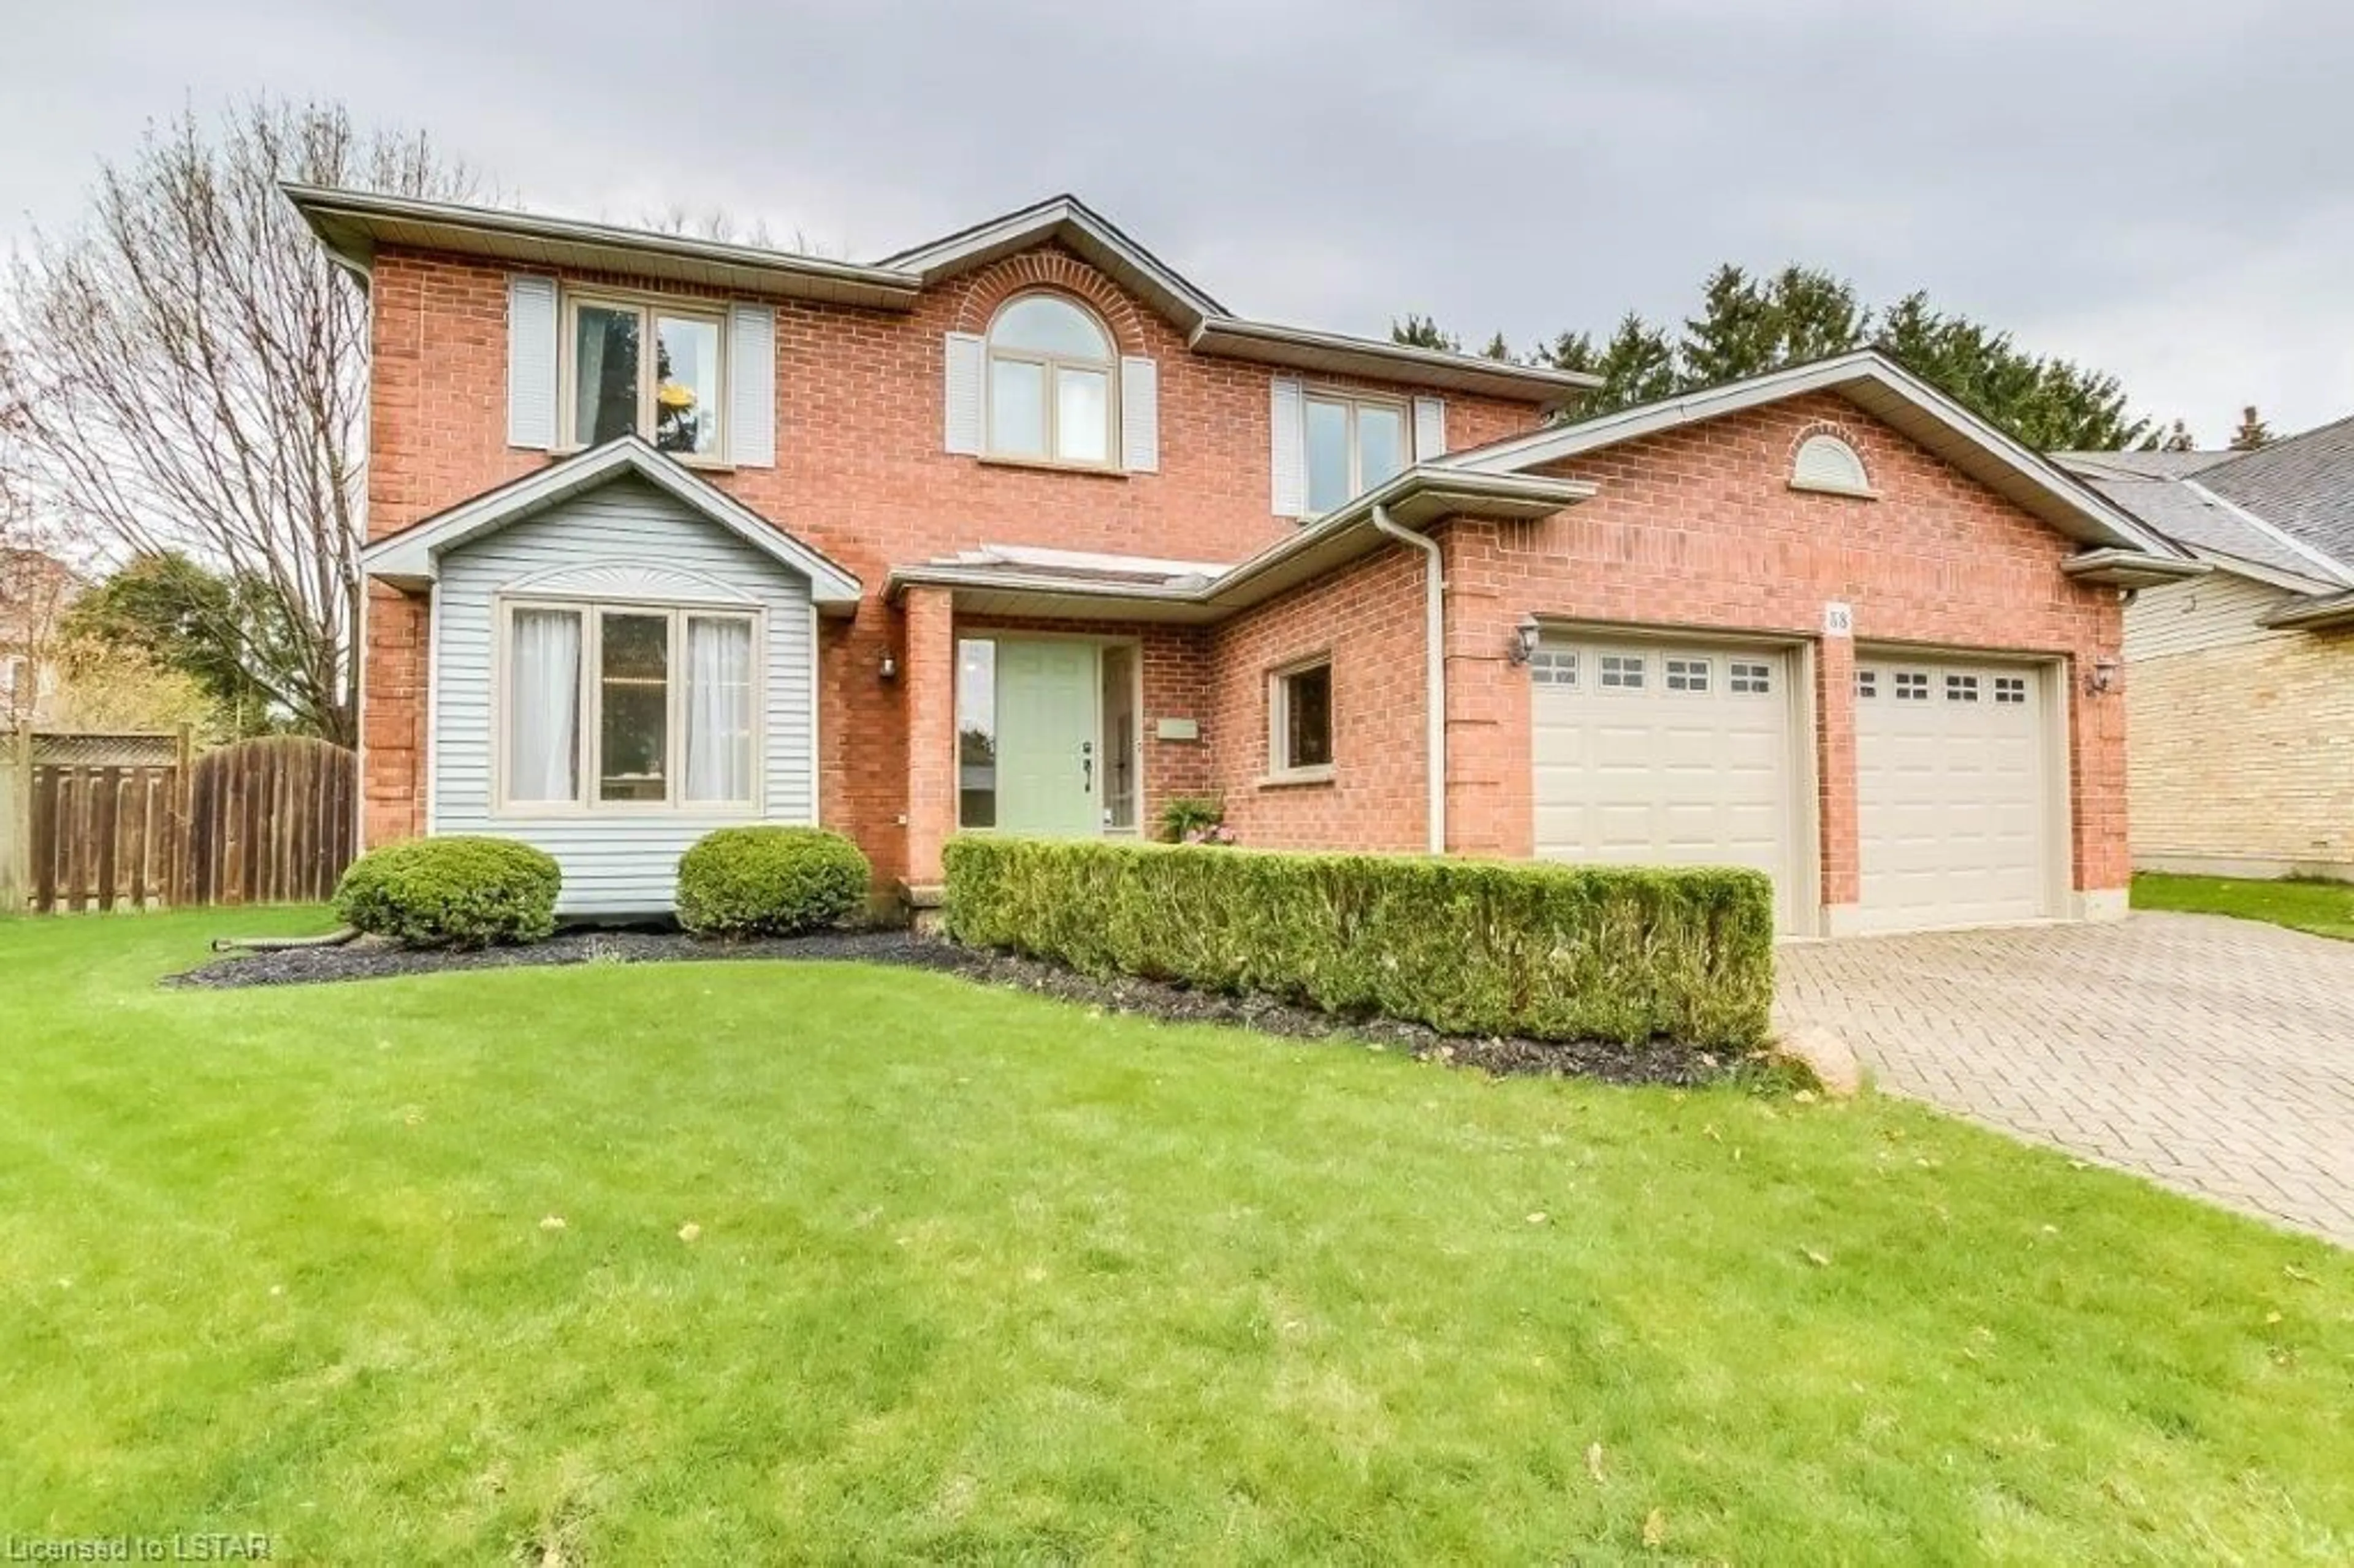 Home with brick exterior material for 38 Bassenthwaite Cres, London Ontario N6G 4V5